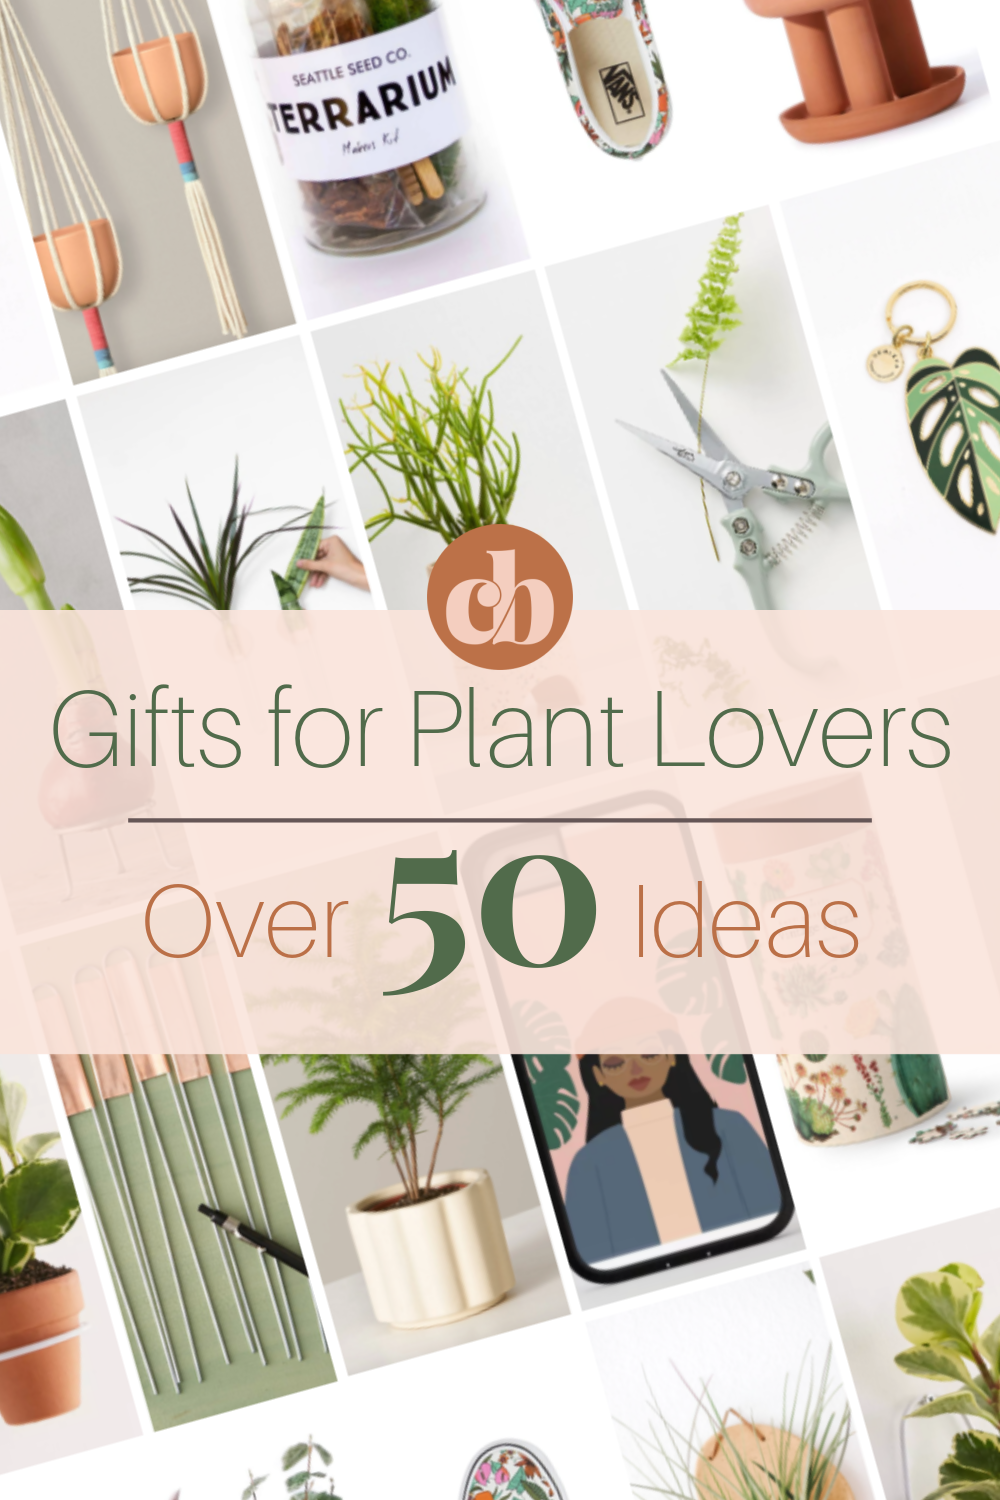 Over 50 Ideas for Plant Lovers - Clever Bloom